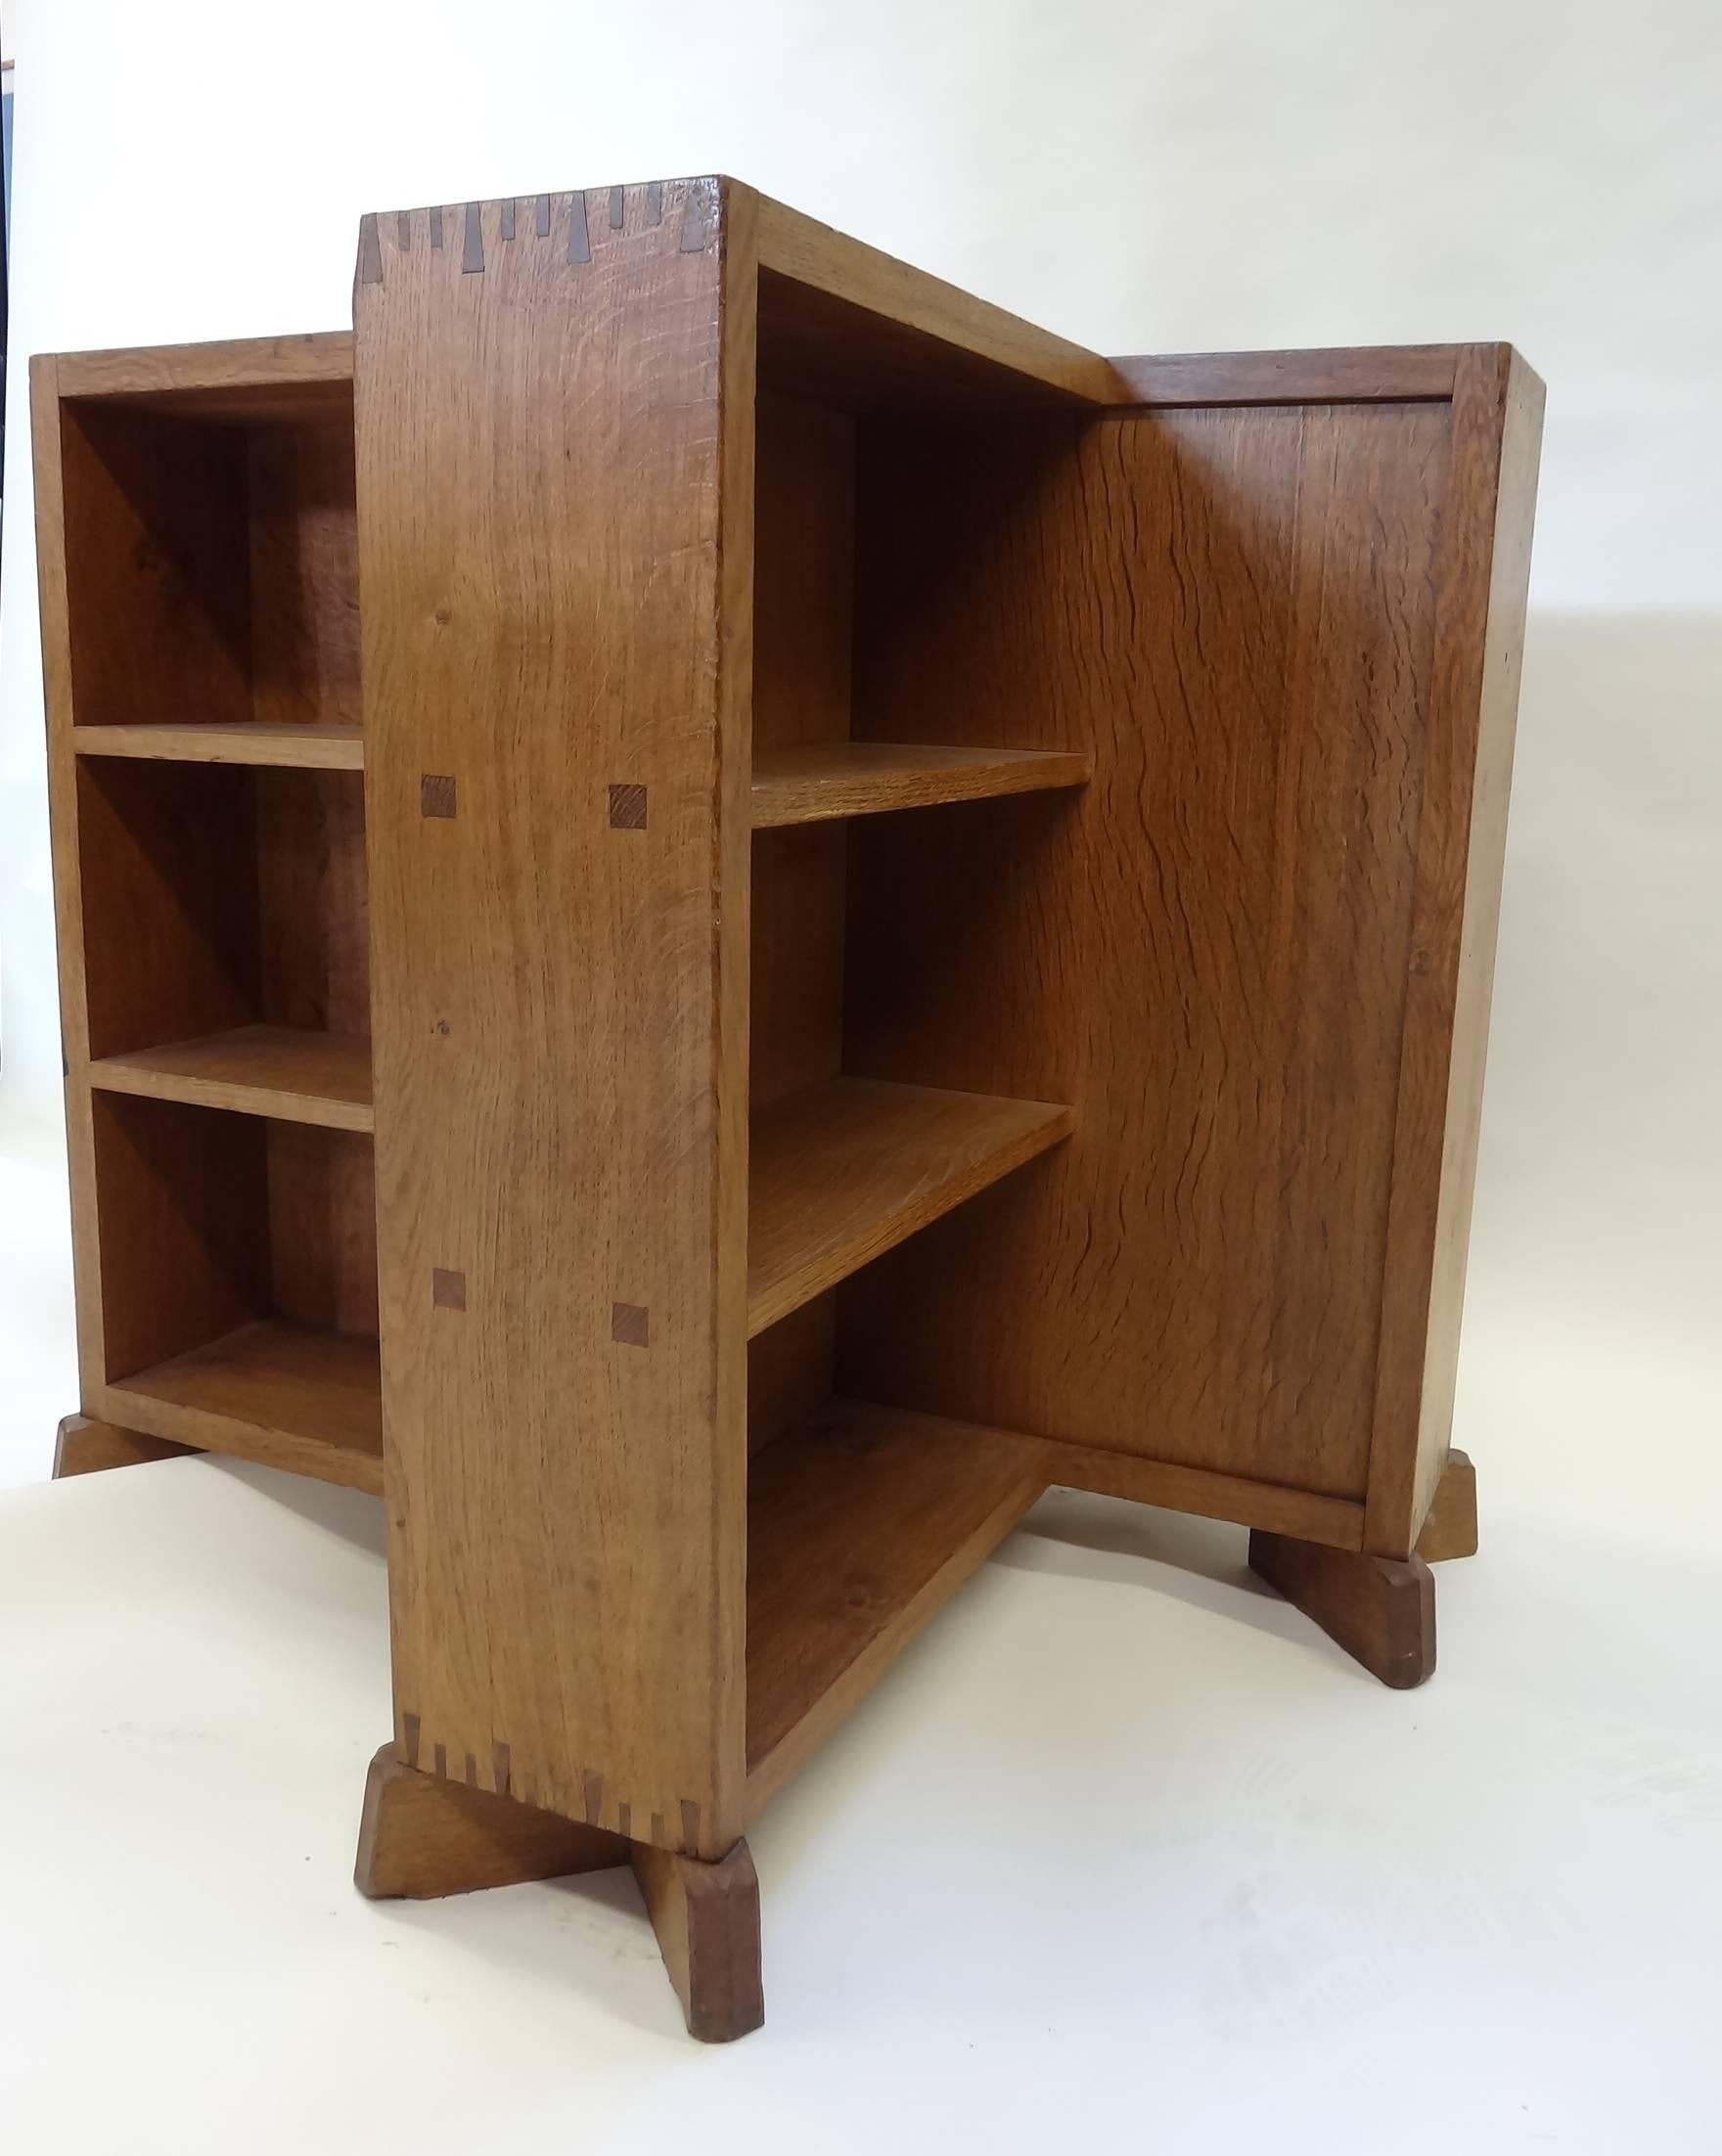 Gordon Russell Arts & Crafts Cotswold School oak booktable bookcase 1920s unique In Good Condition For Sale In London, GB